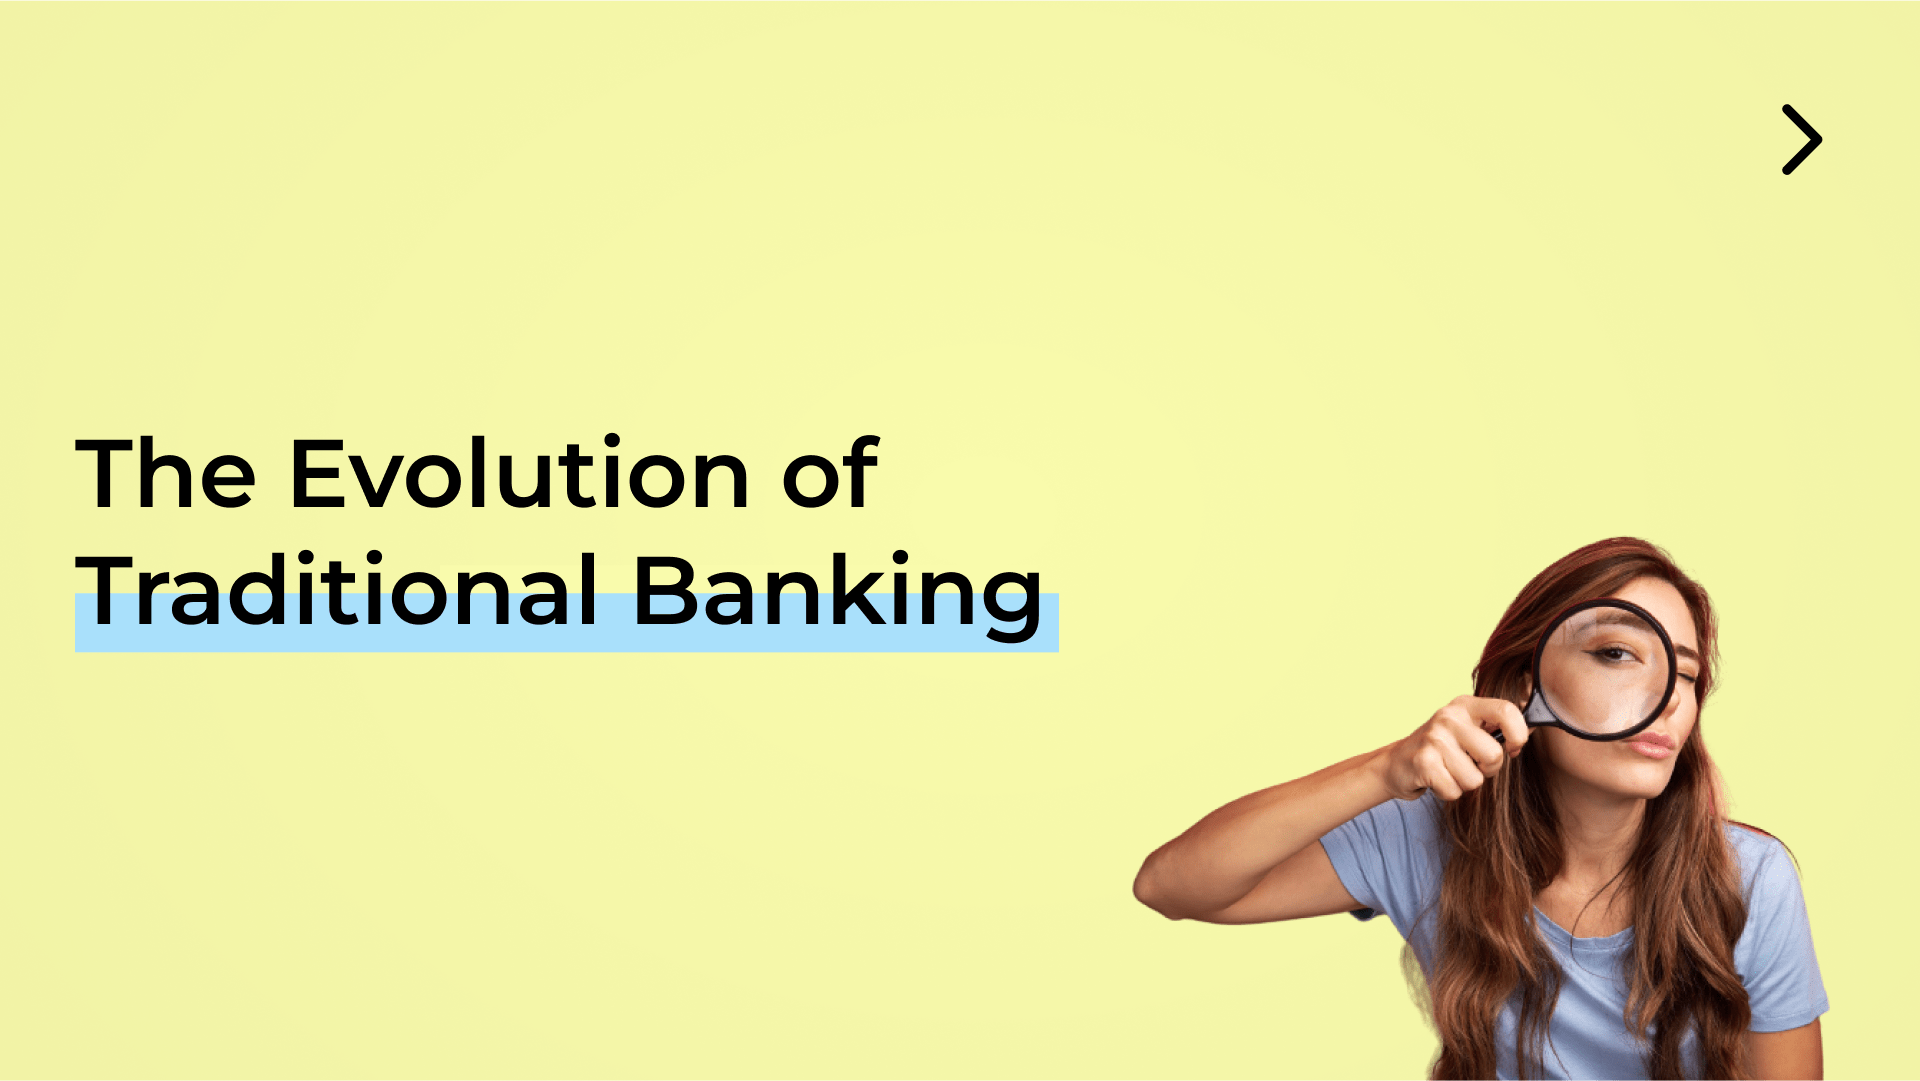 The Evolution of Traditional Banking